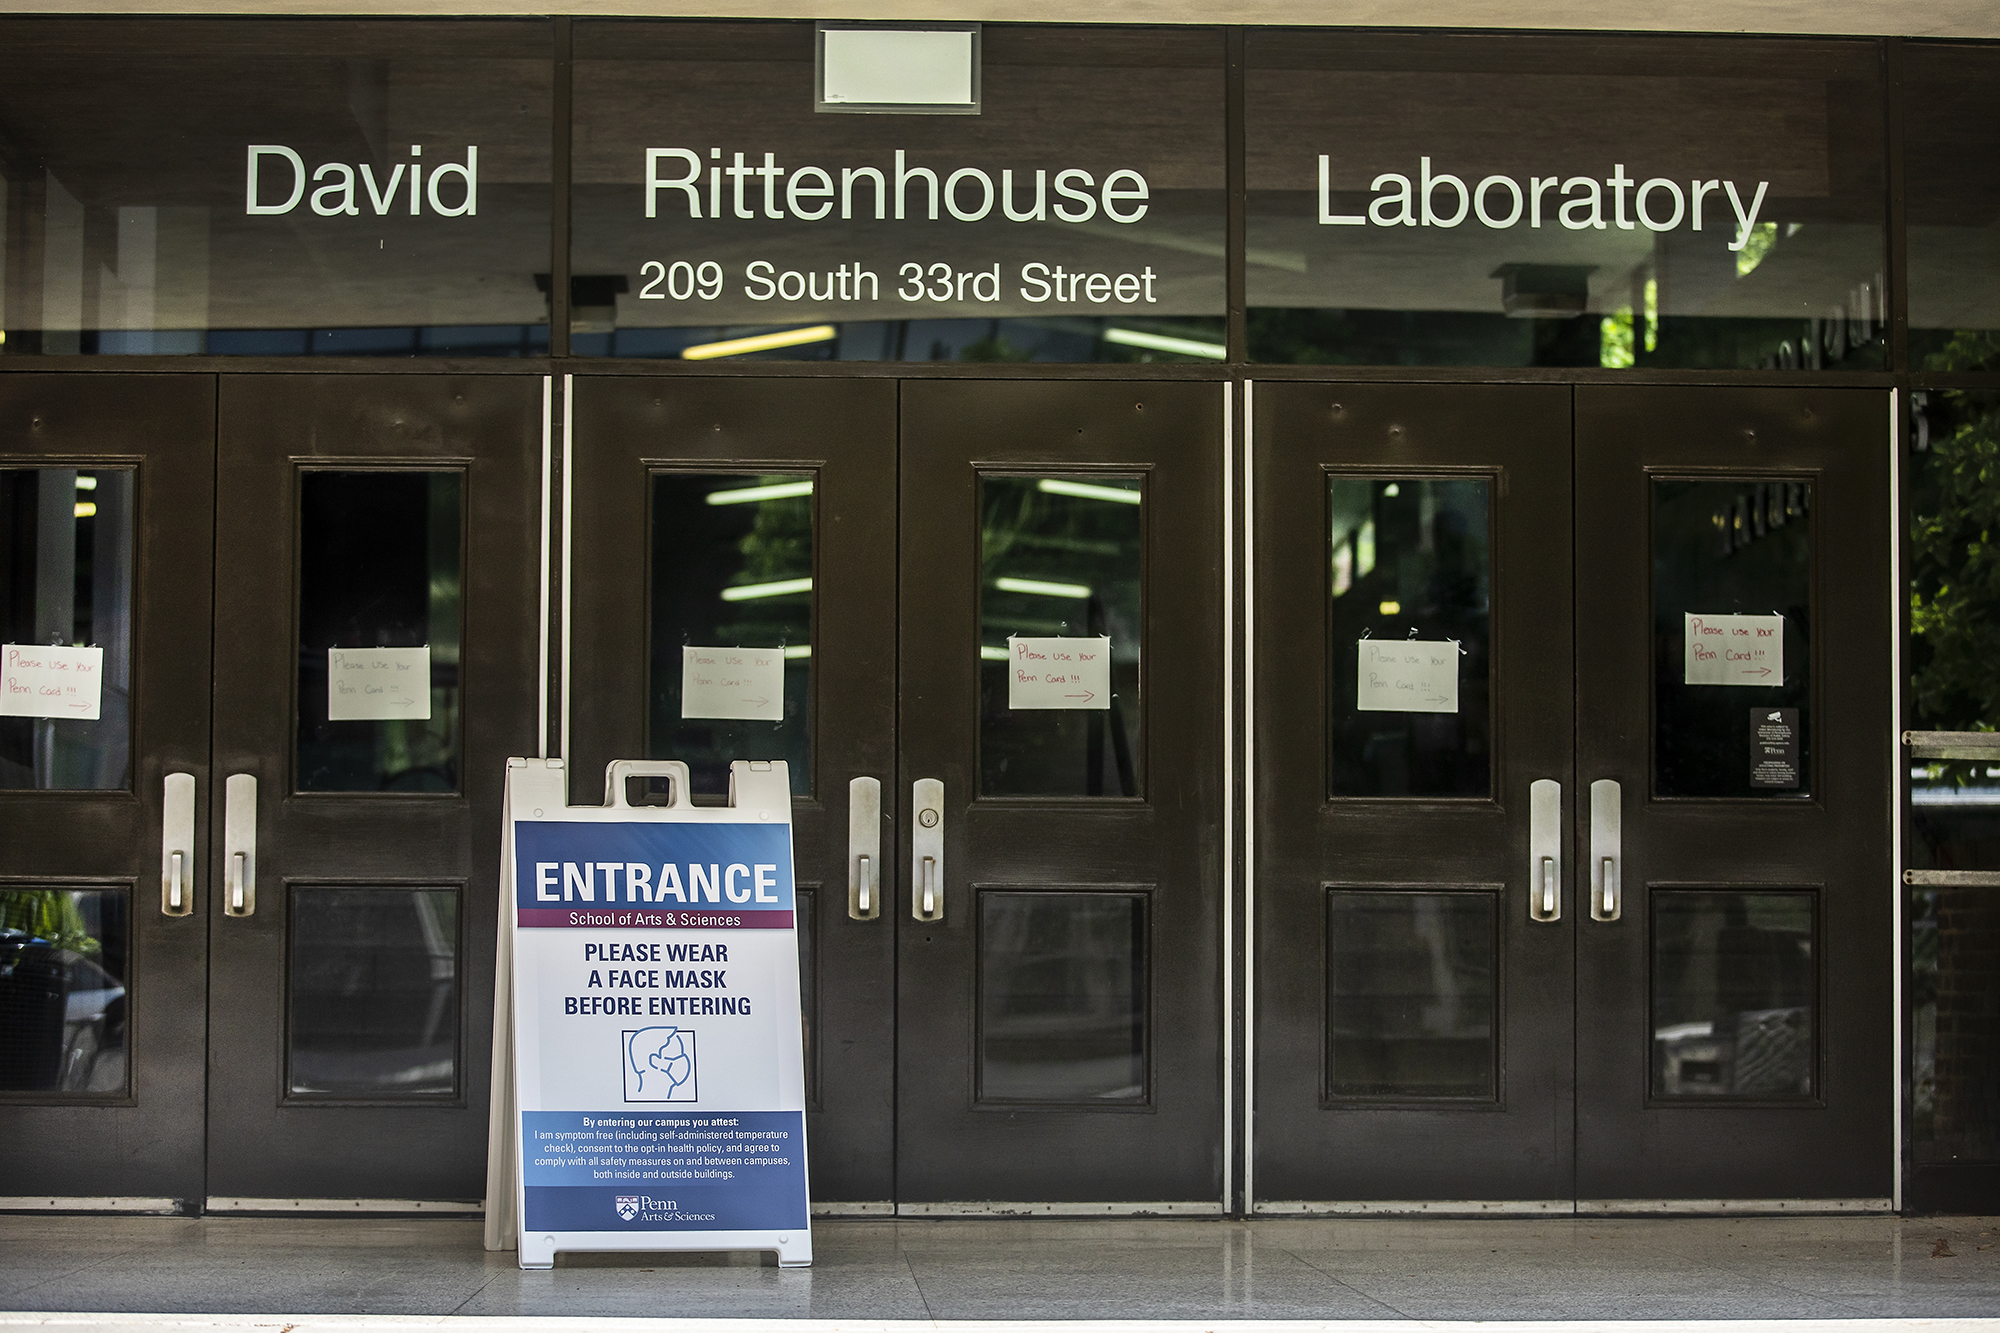 a sign in front of the david rittenhouse laboratory building that says entrance, please wear a face mask before entering